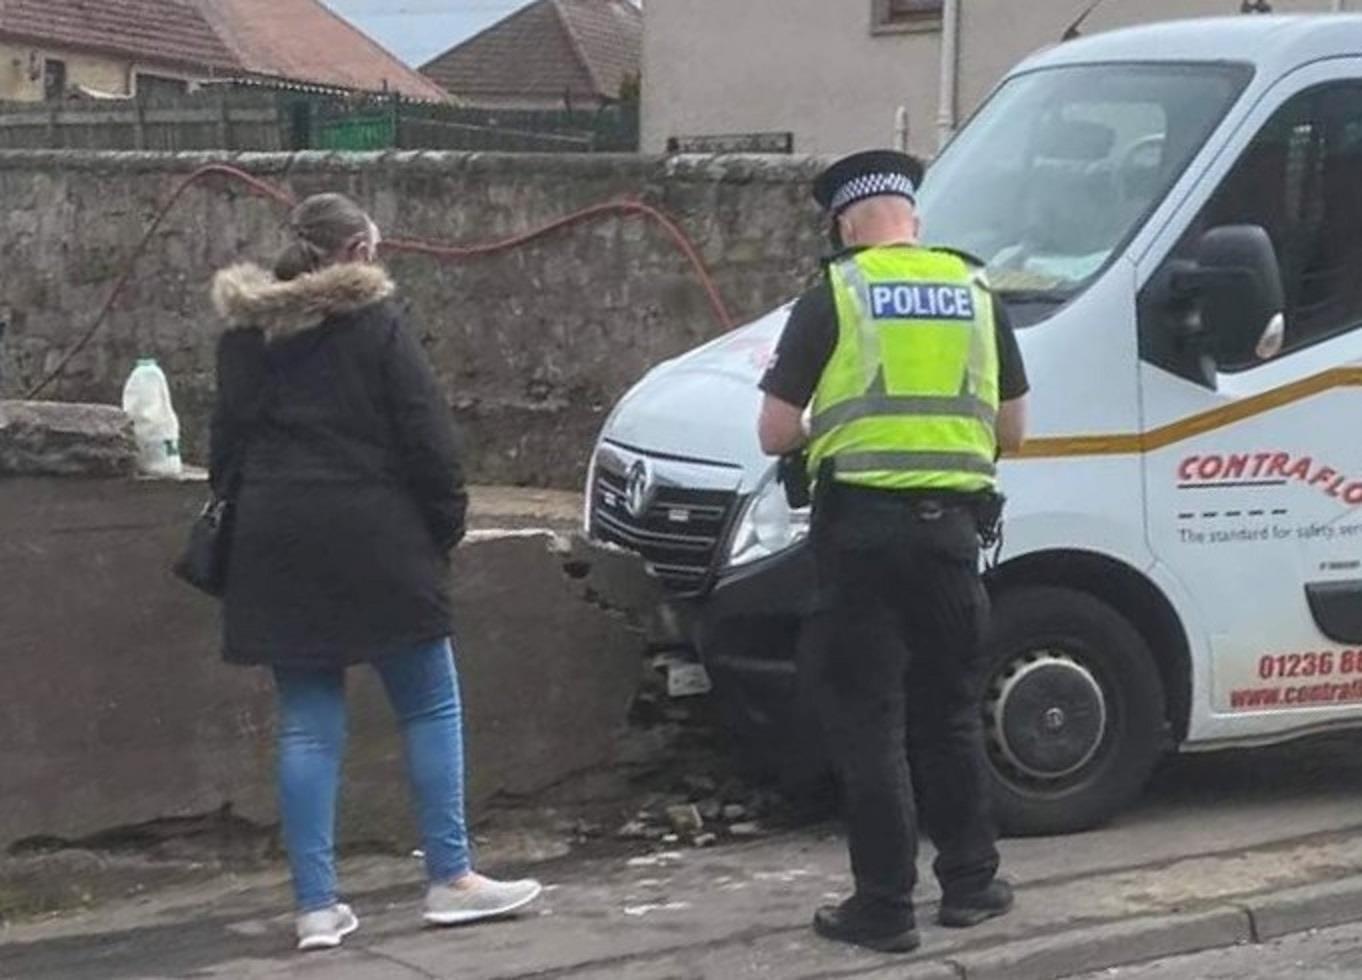 The van crashed into a wall on a Lochgelly street after striking a pensioner.